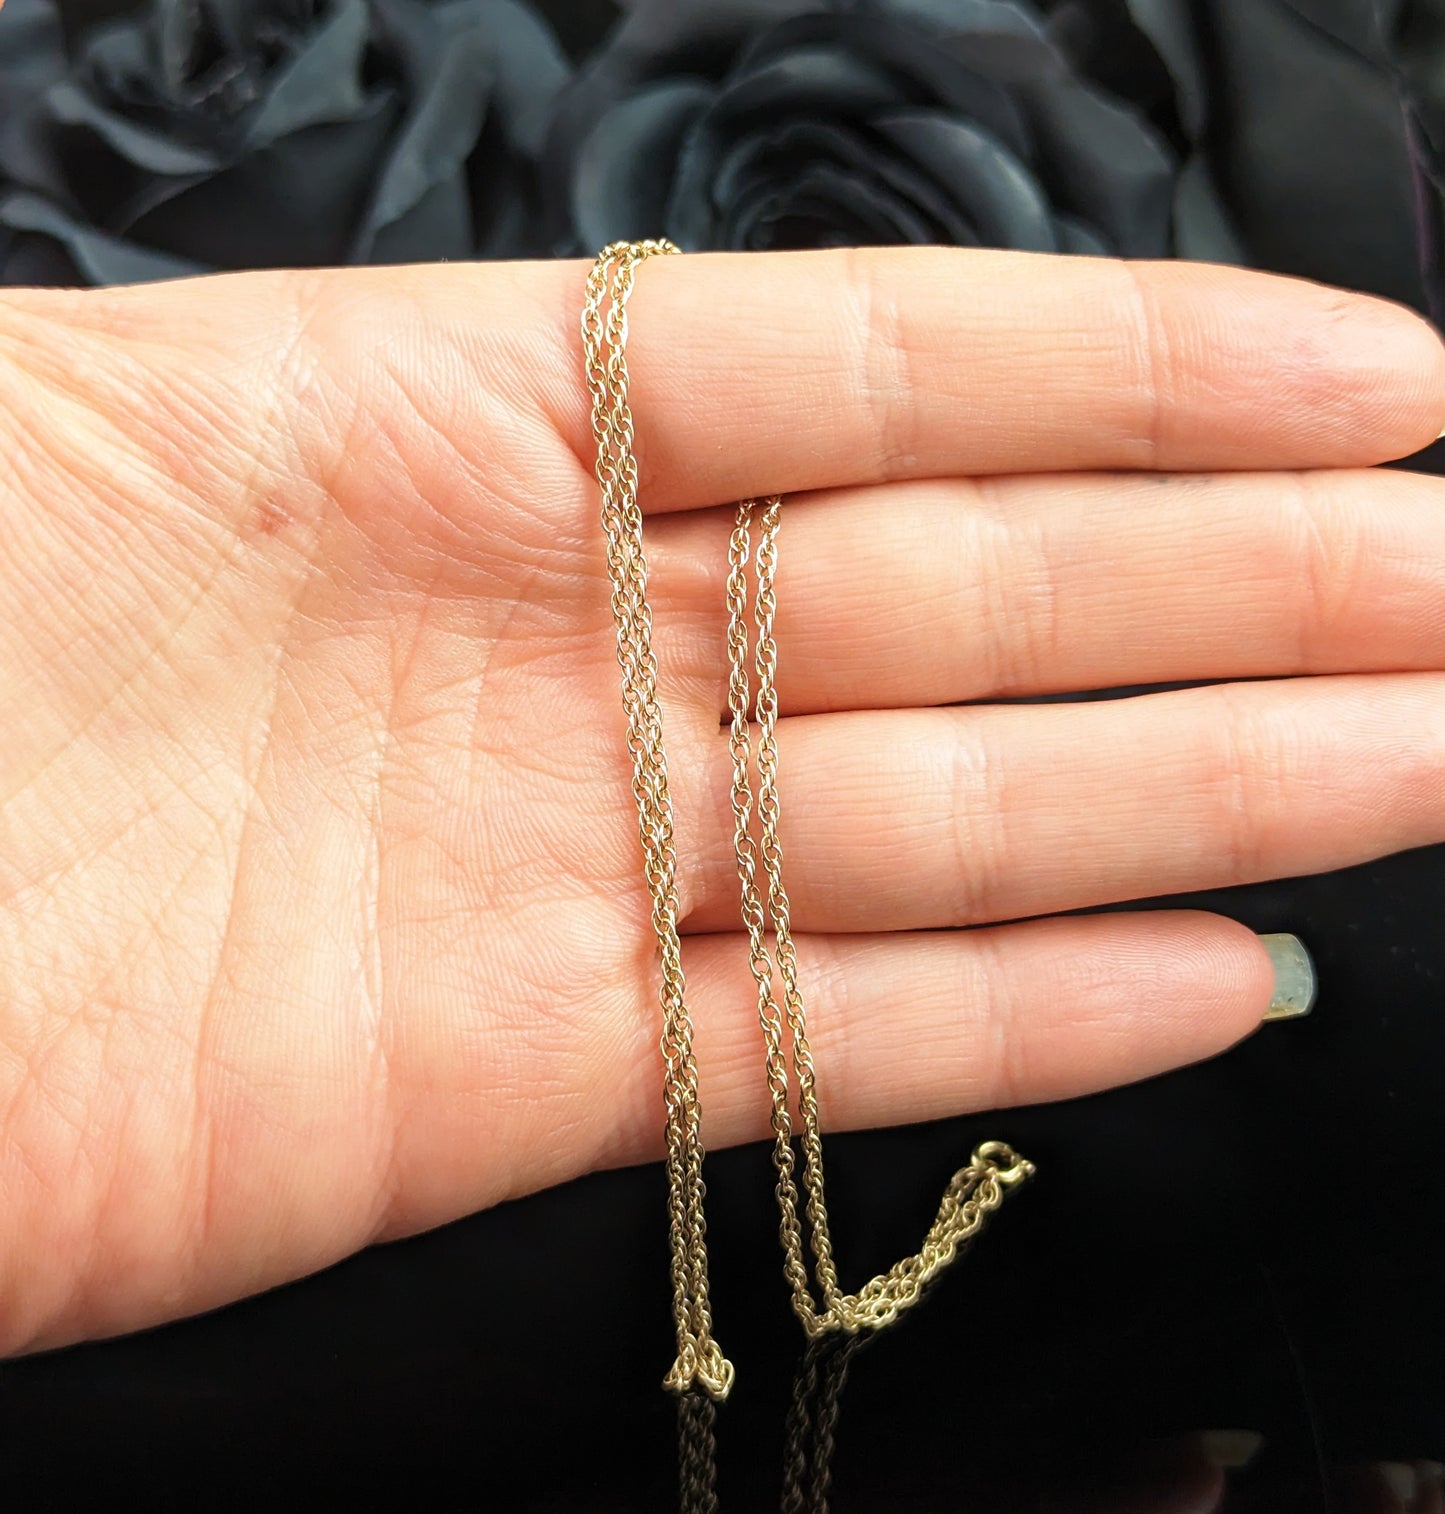 Vintage 9ct gold fancy link chain necklace, open rope chain